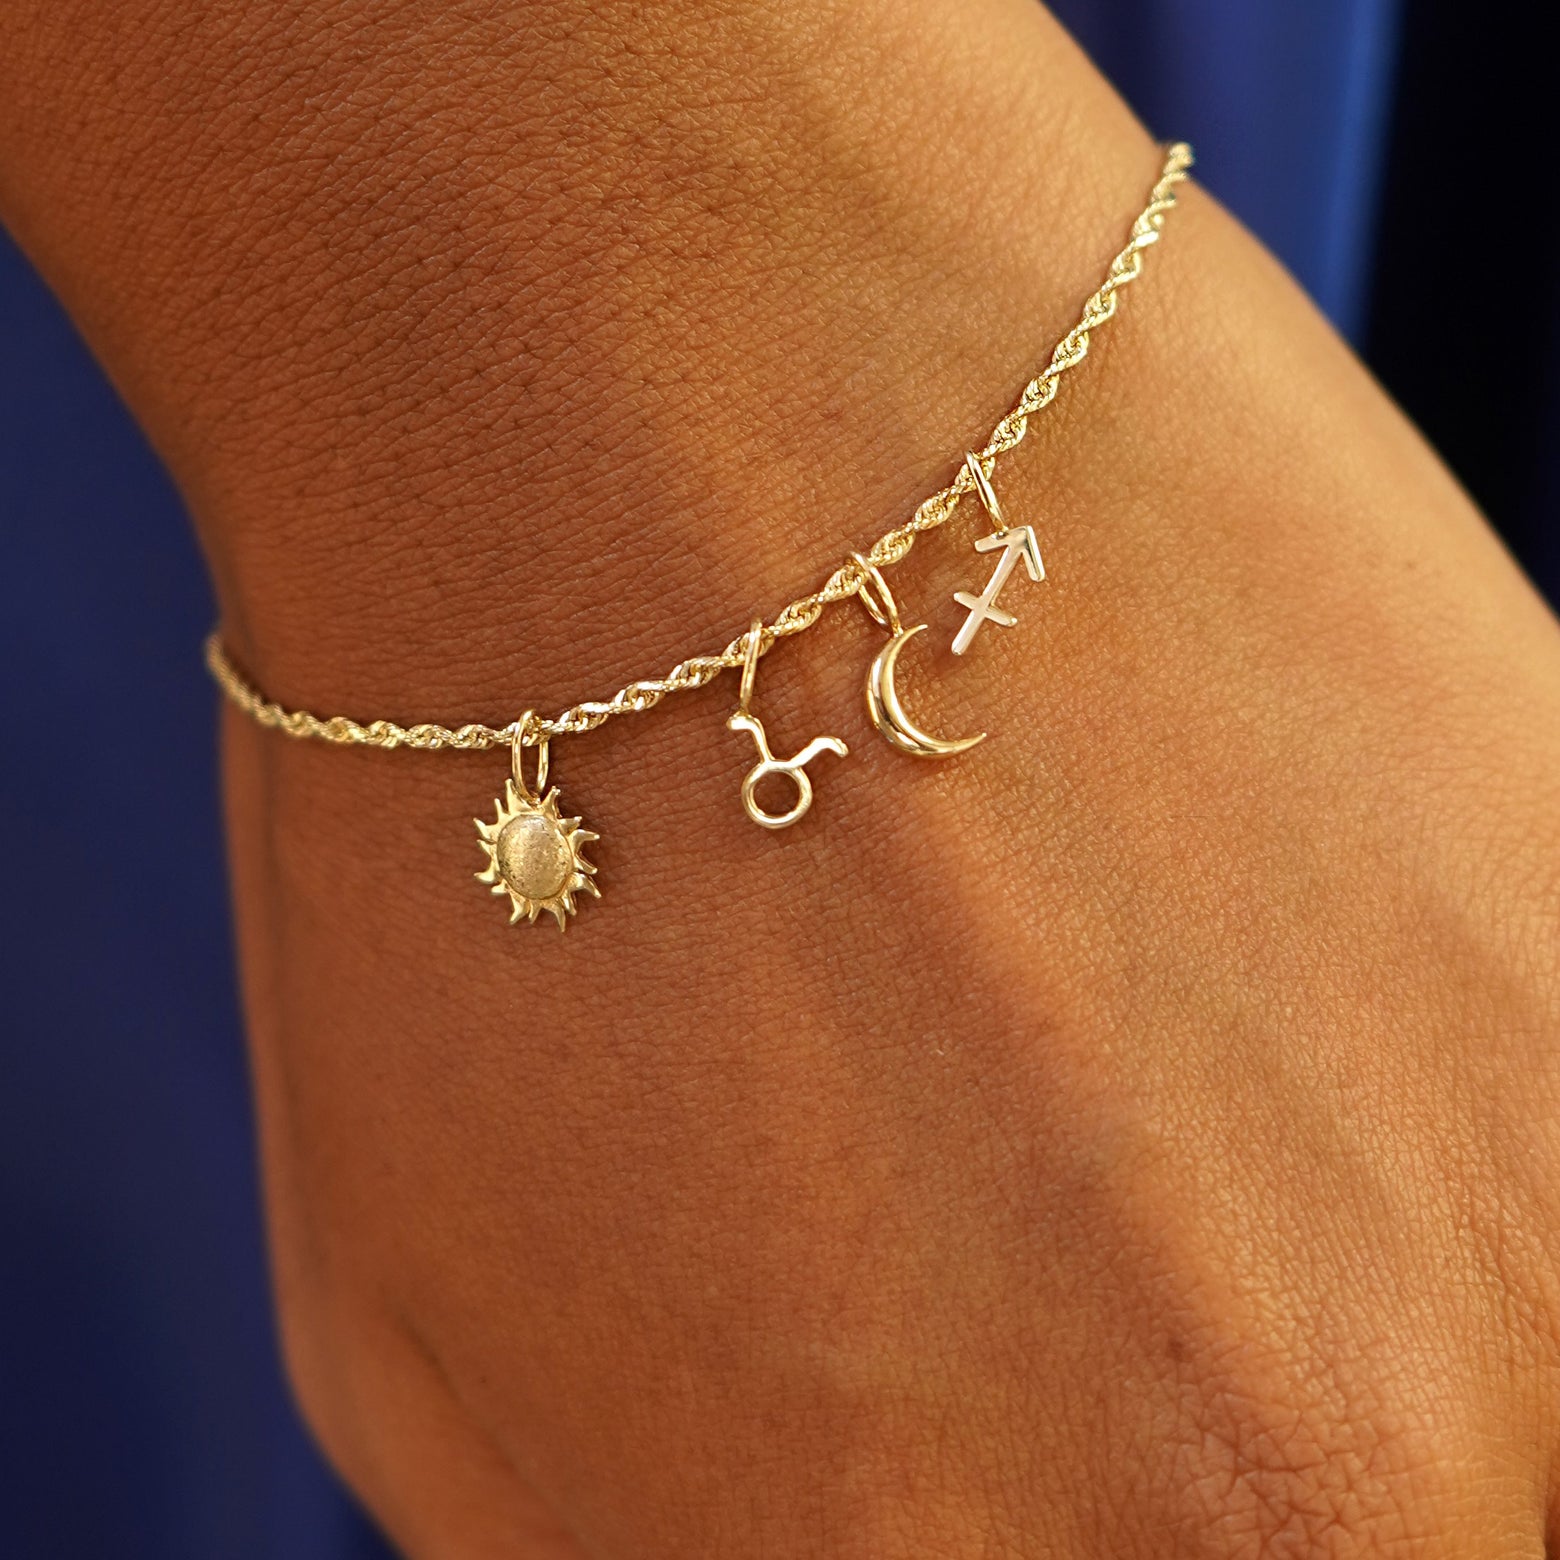 Close up view of a model's wrist wearing a Rope Bracelet with a Sun, a Moon, and two Horoscope Charms